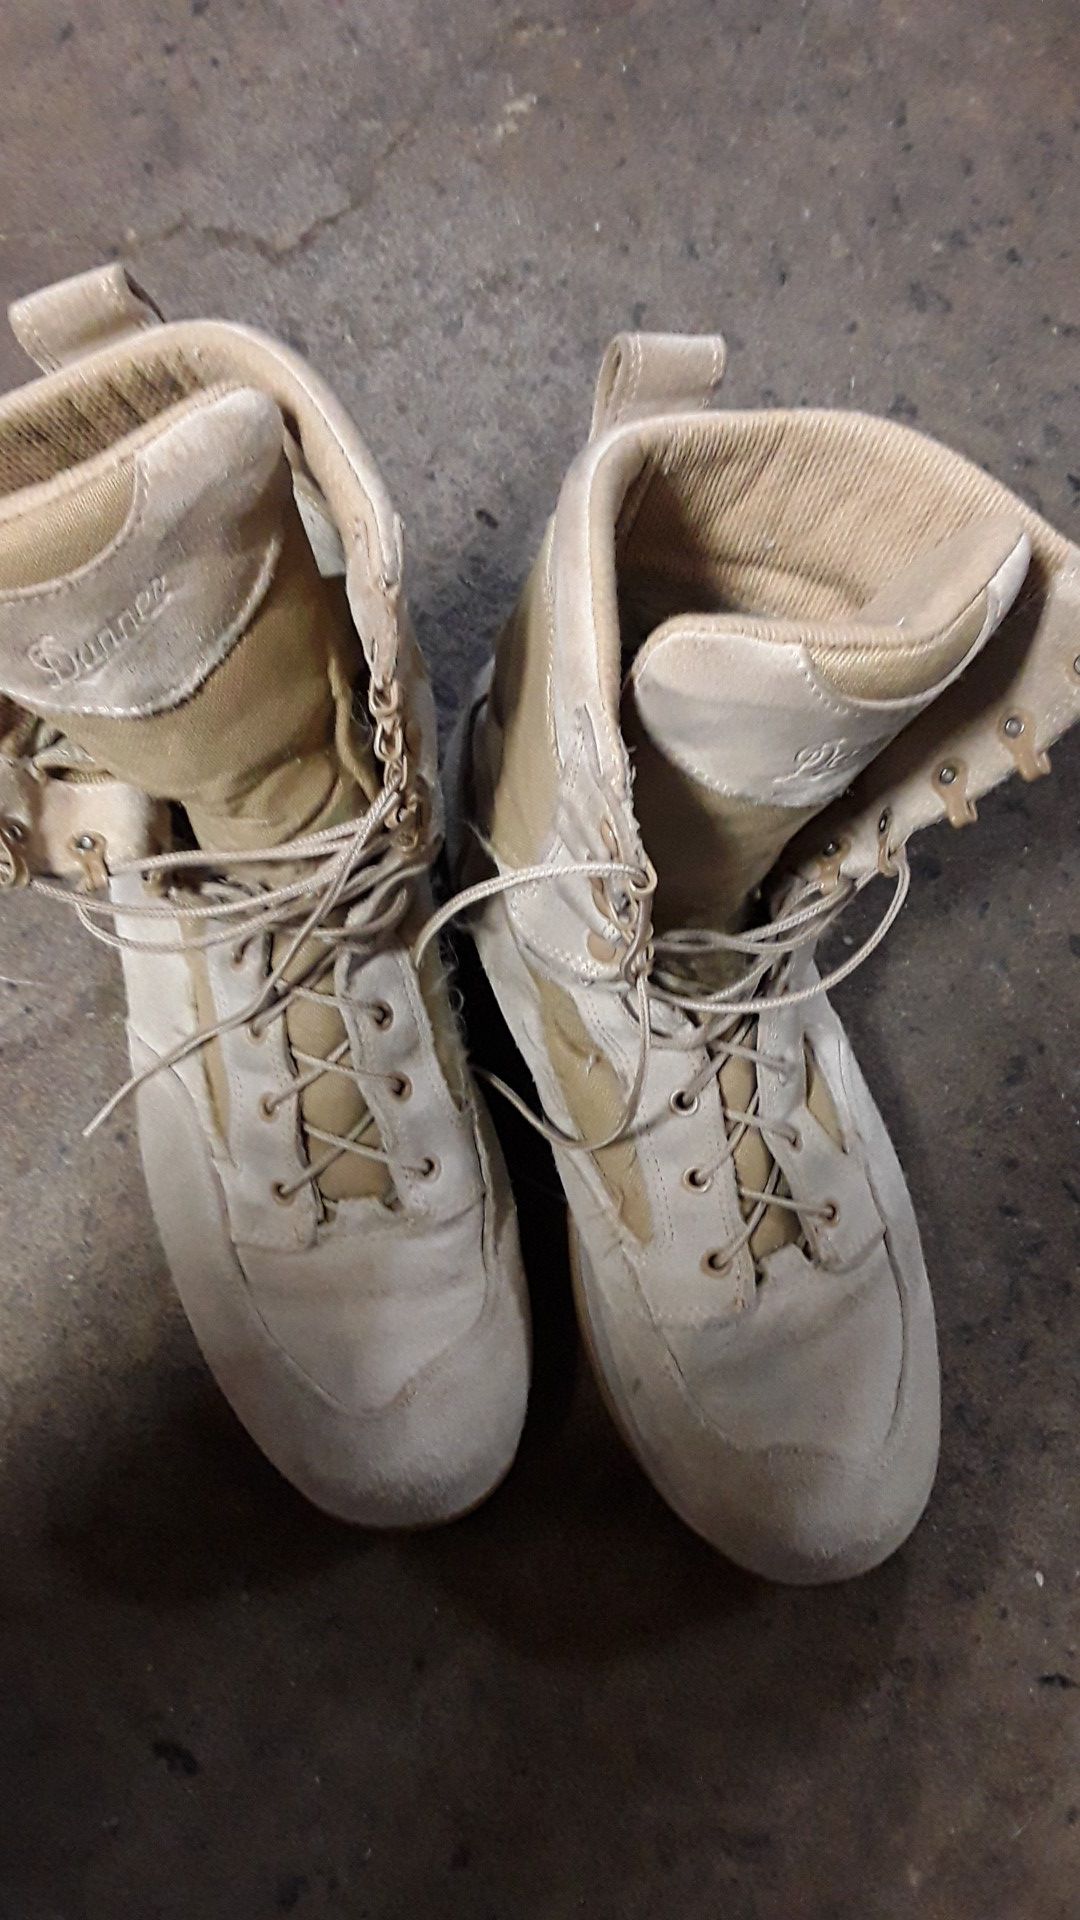 Danner marine boots tan color used but still in good condition size 13